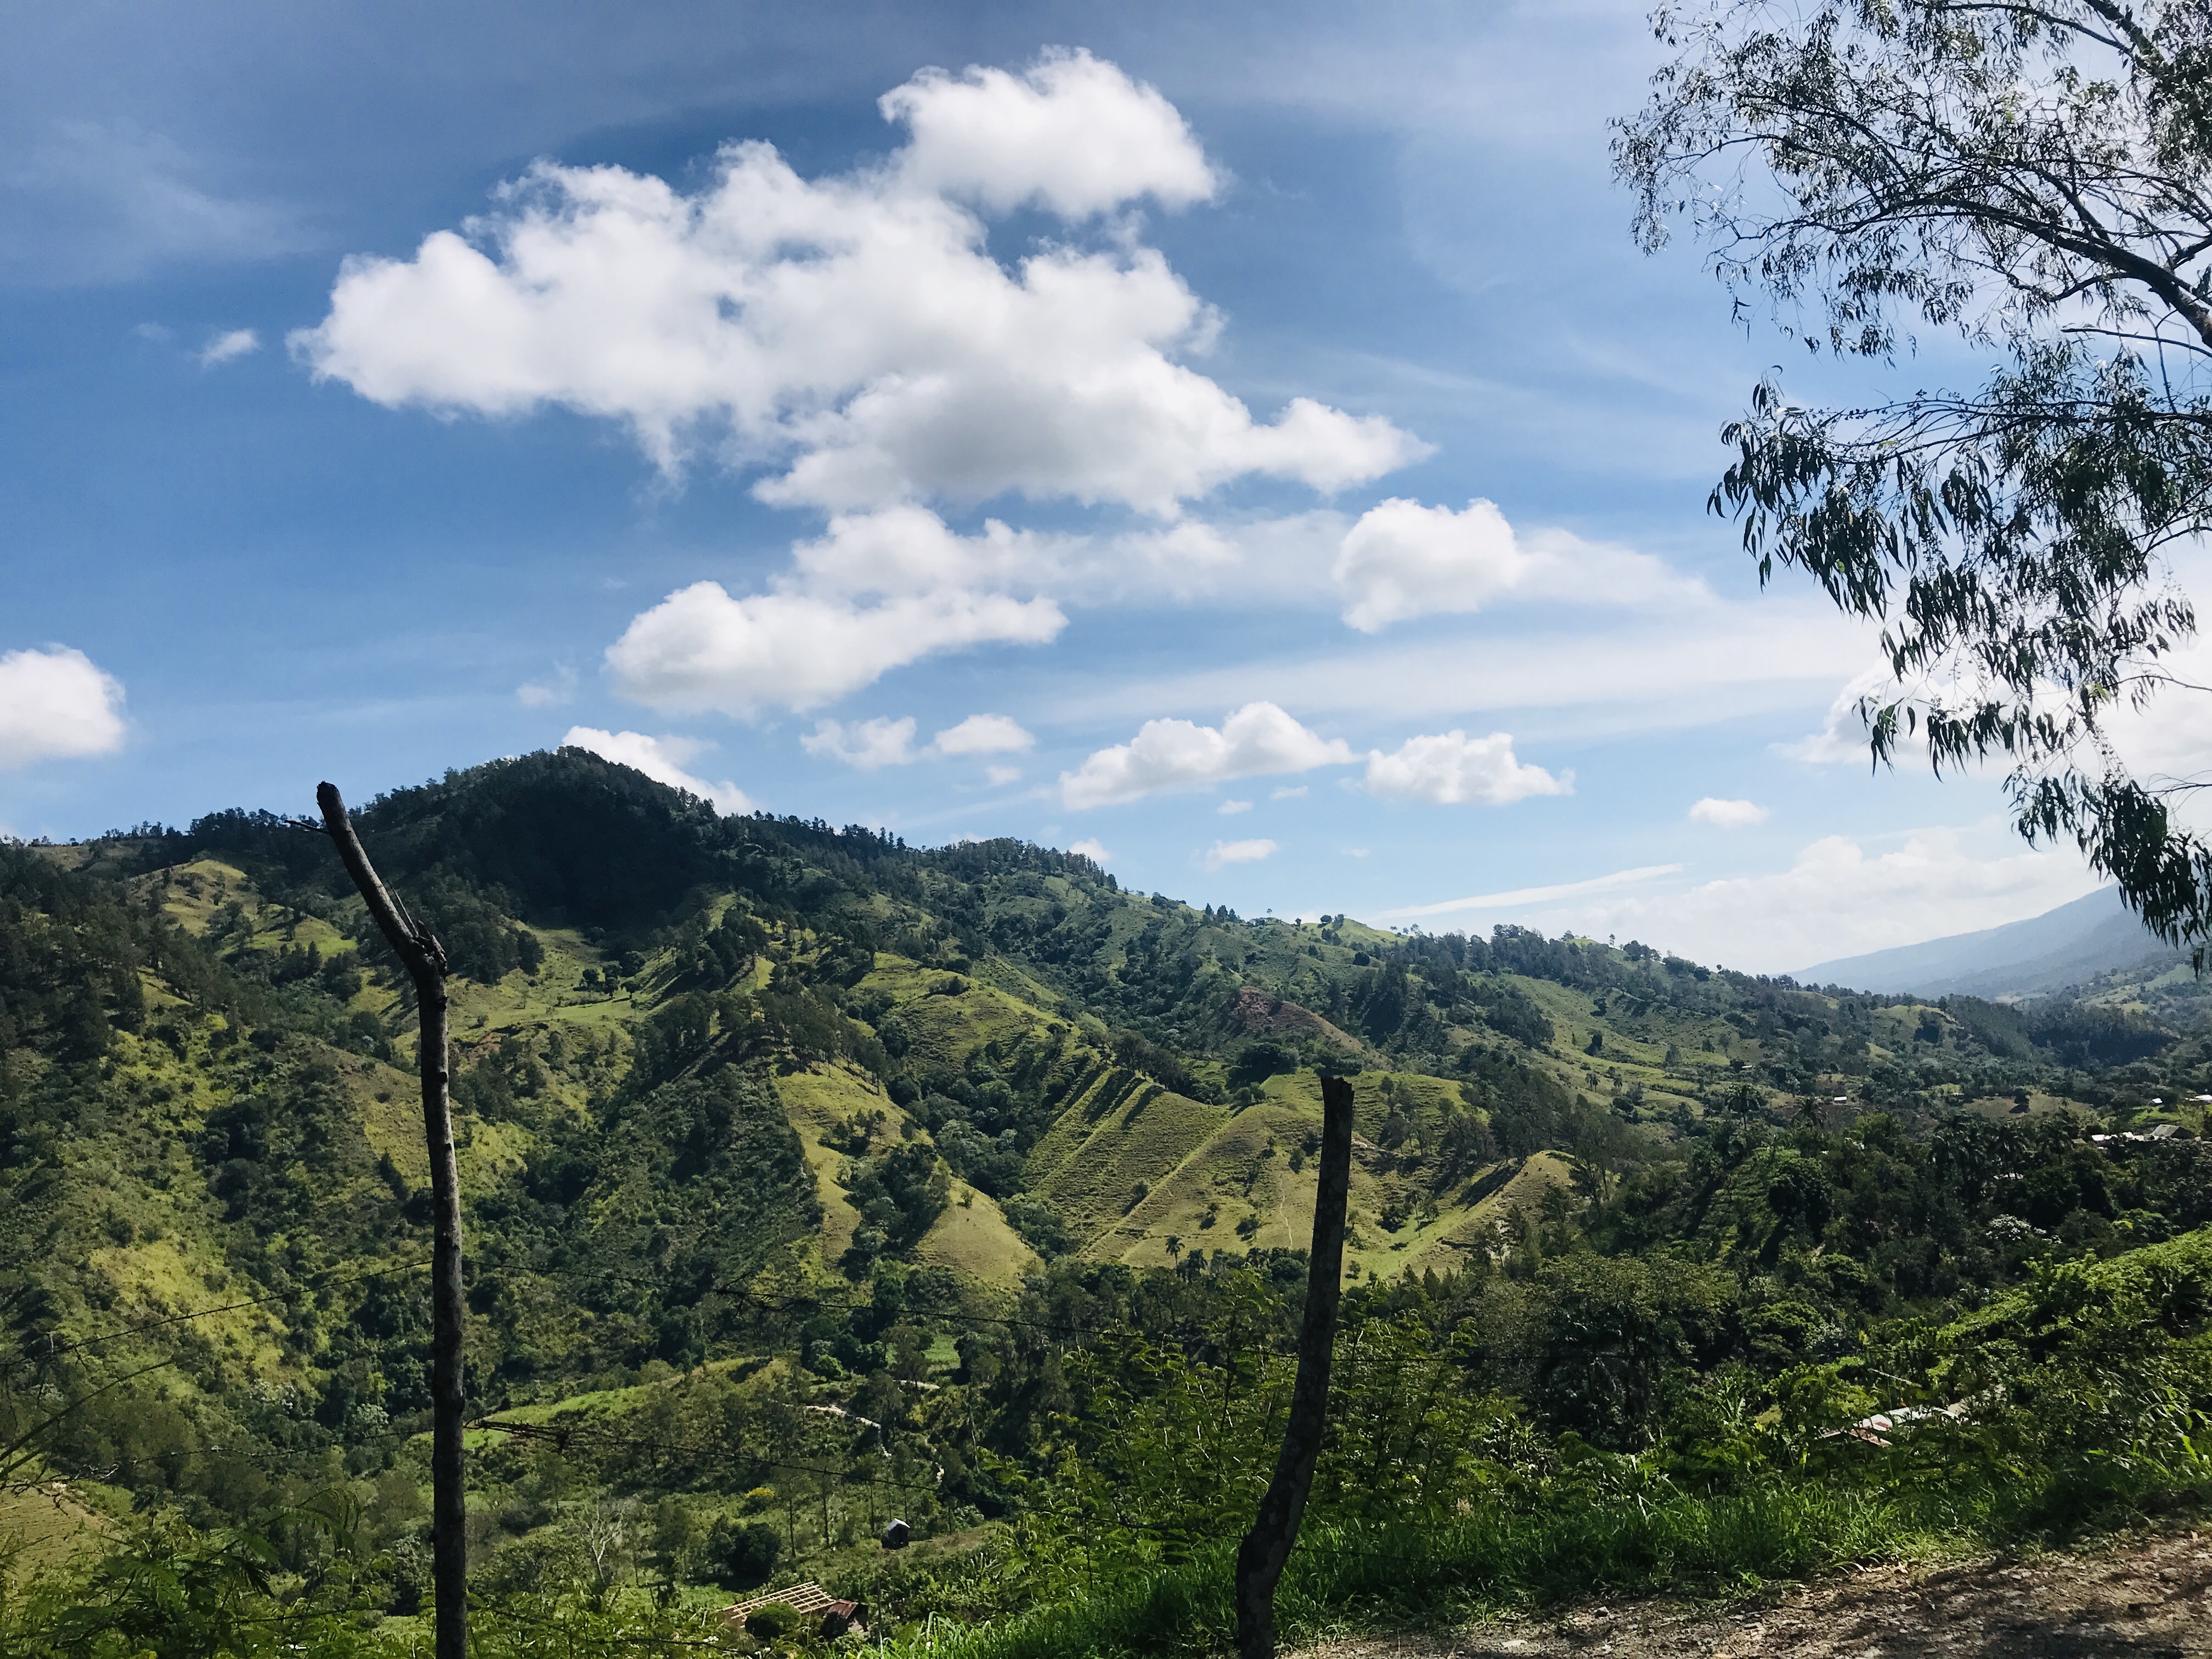 While the Dominican Republic is known for its beaches, it also boasts vast mountain ranges and fertile green valleys. Pico Duarte, at 3,098 meters (10,164 feet), is the highest peak in the Caribbean.